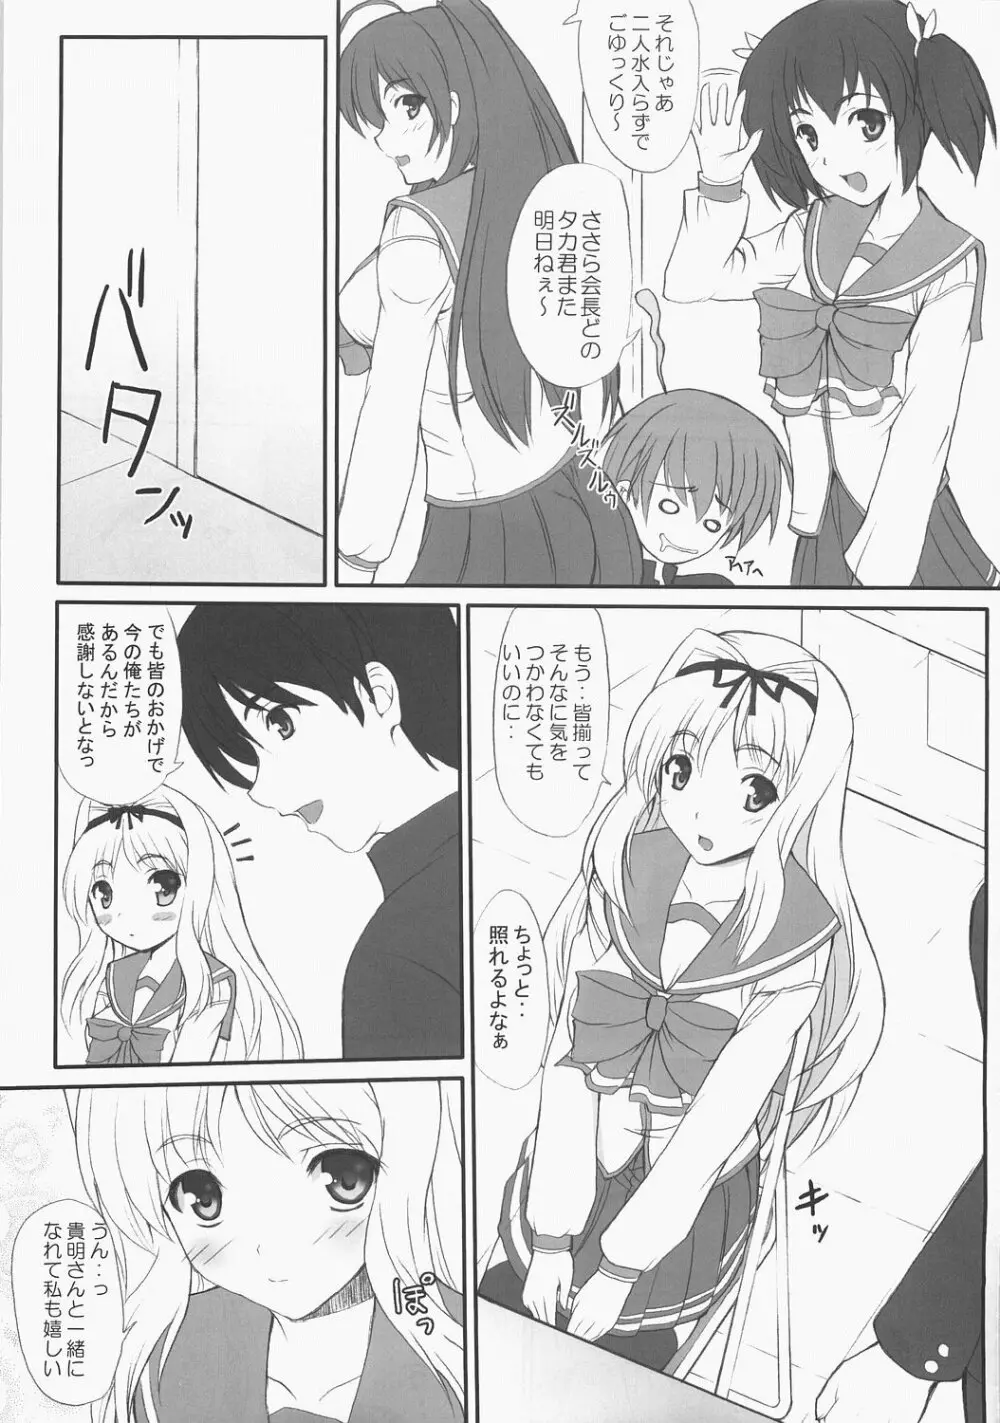 Sister's Impact S-mode - page6